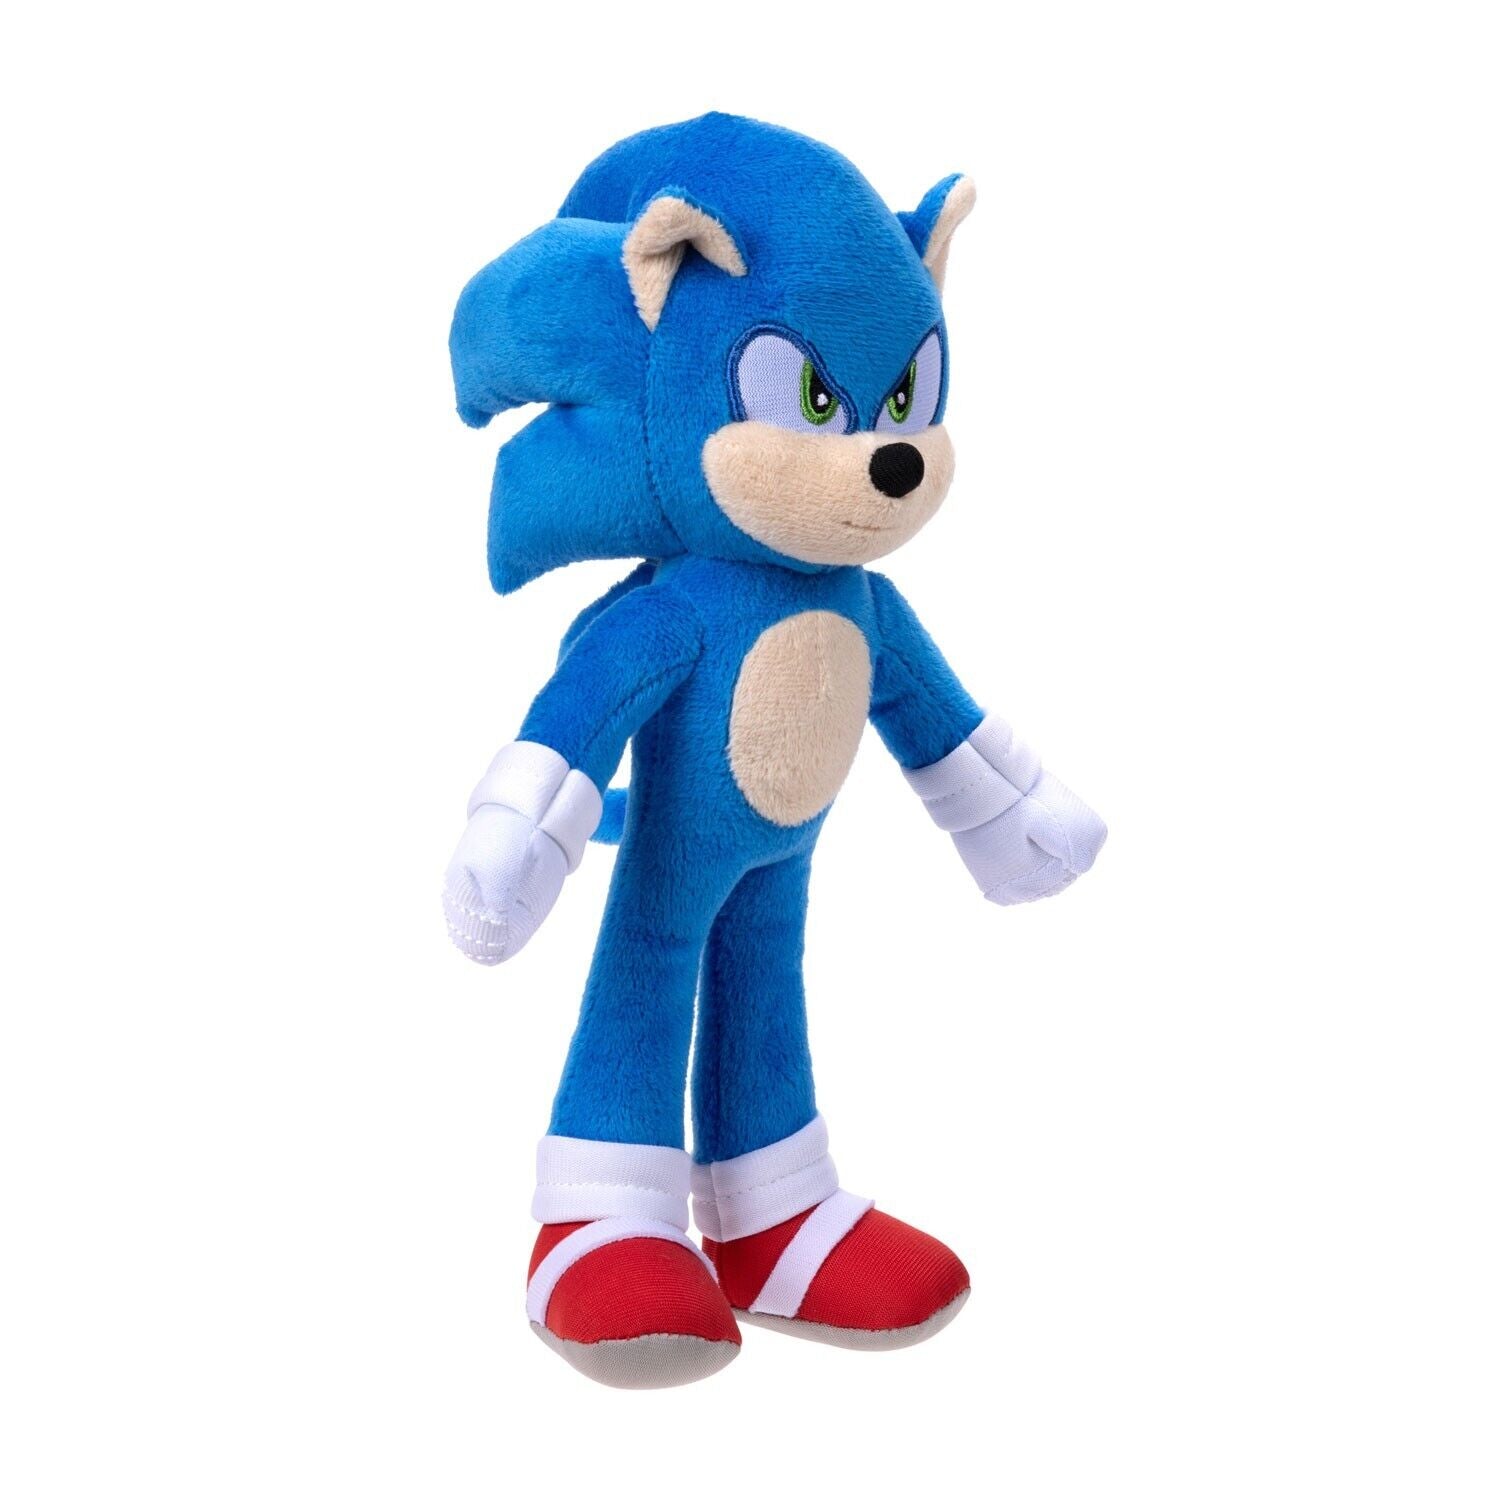 BRAND NEW Sonic The Hedgehog 2 Movie 9-Inch Plush Sonic - Collectible Toy